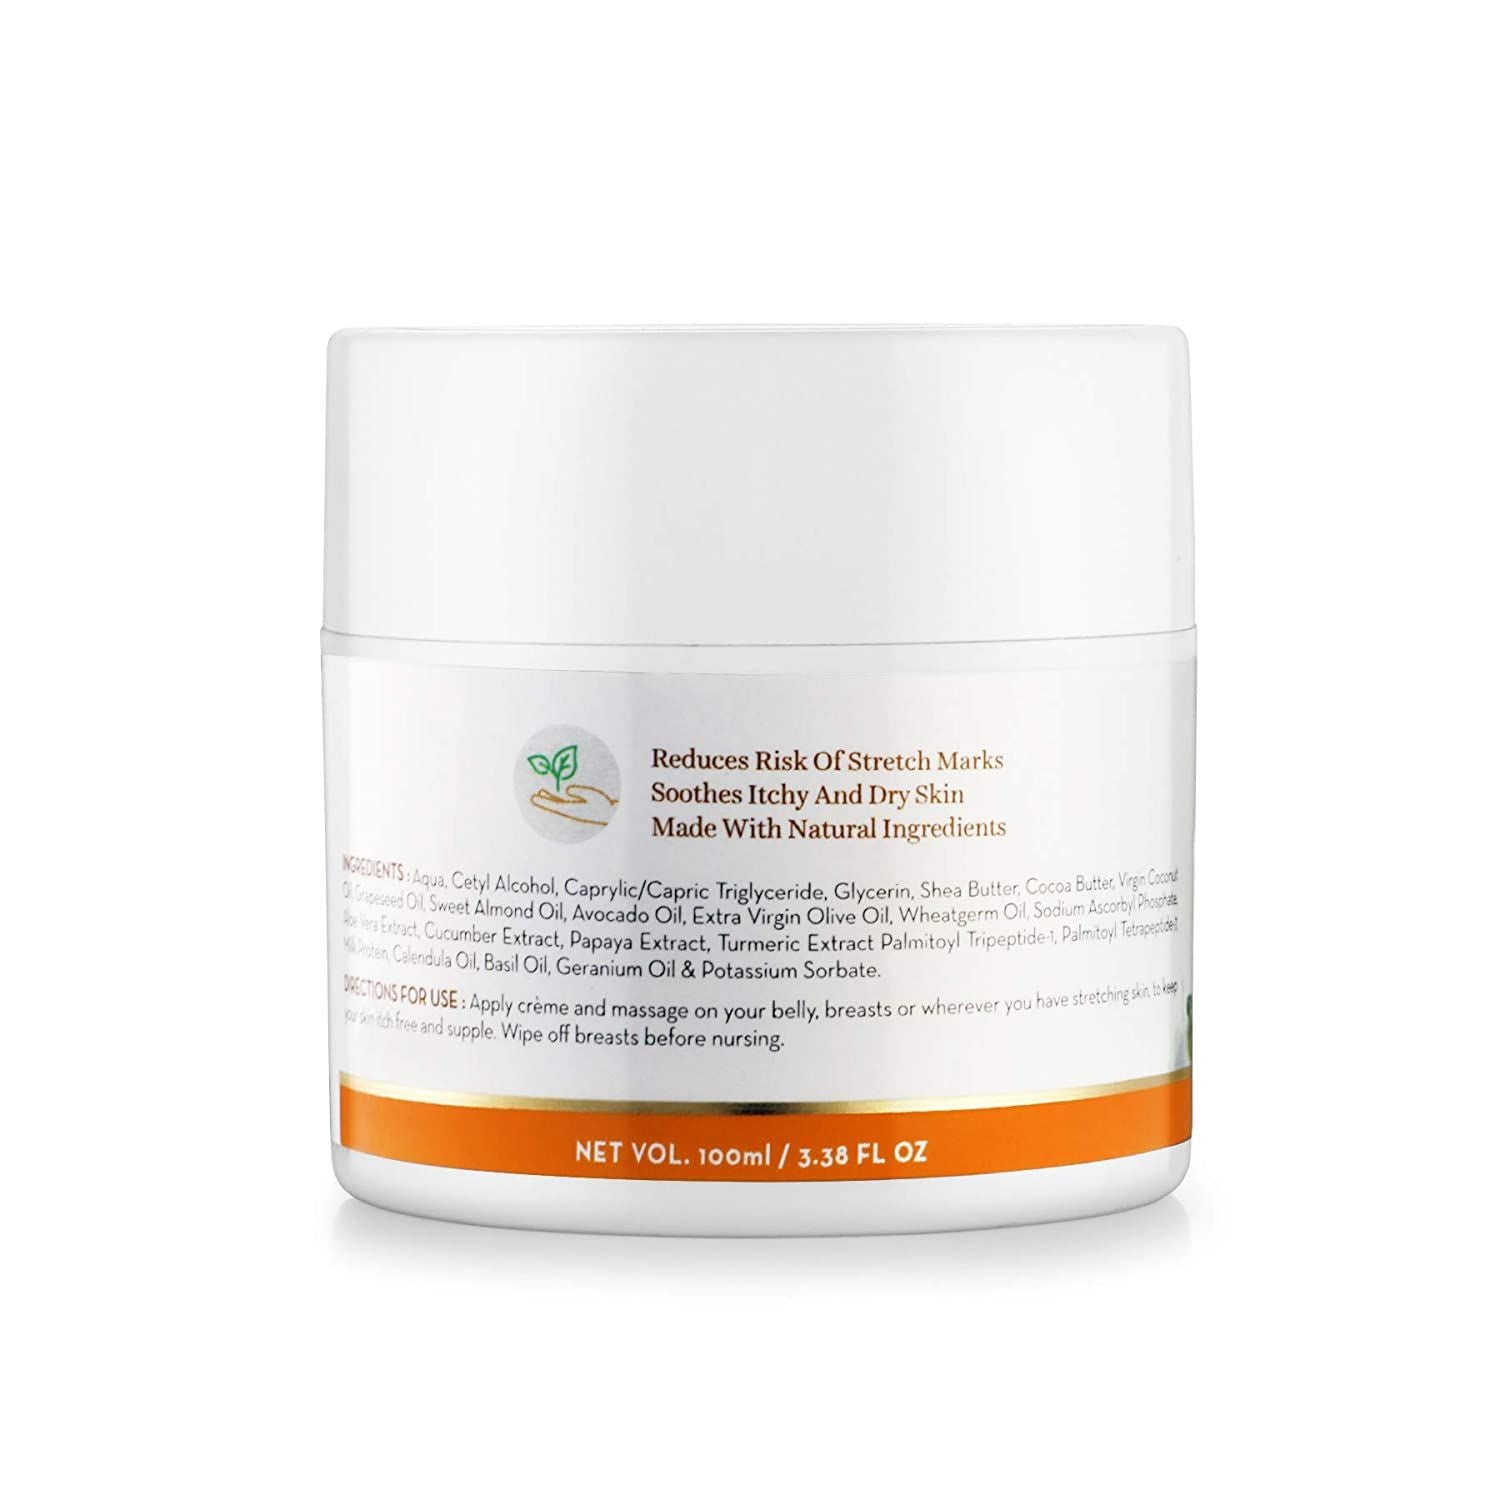 Mamaearth BT Mamaearth Body Creme for Stretch Marks 100ml